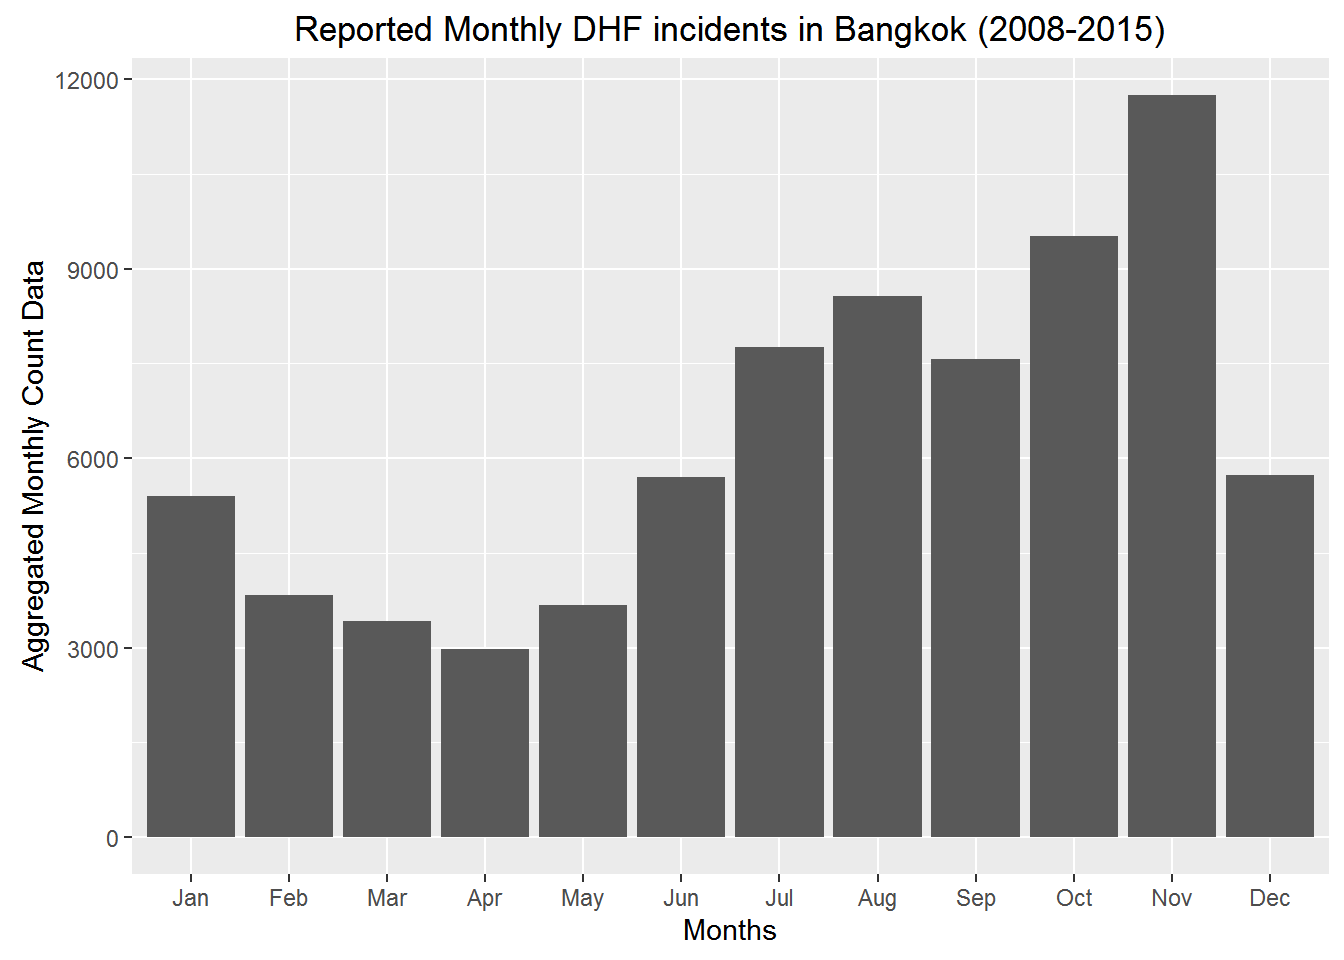 The DHF incidence peaked in October and November . It seems that dengue outbreak increases every alternative year.